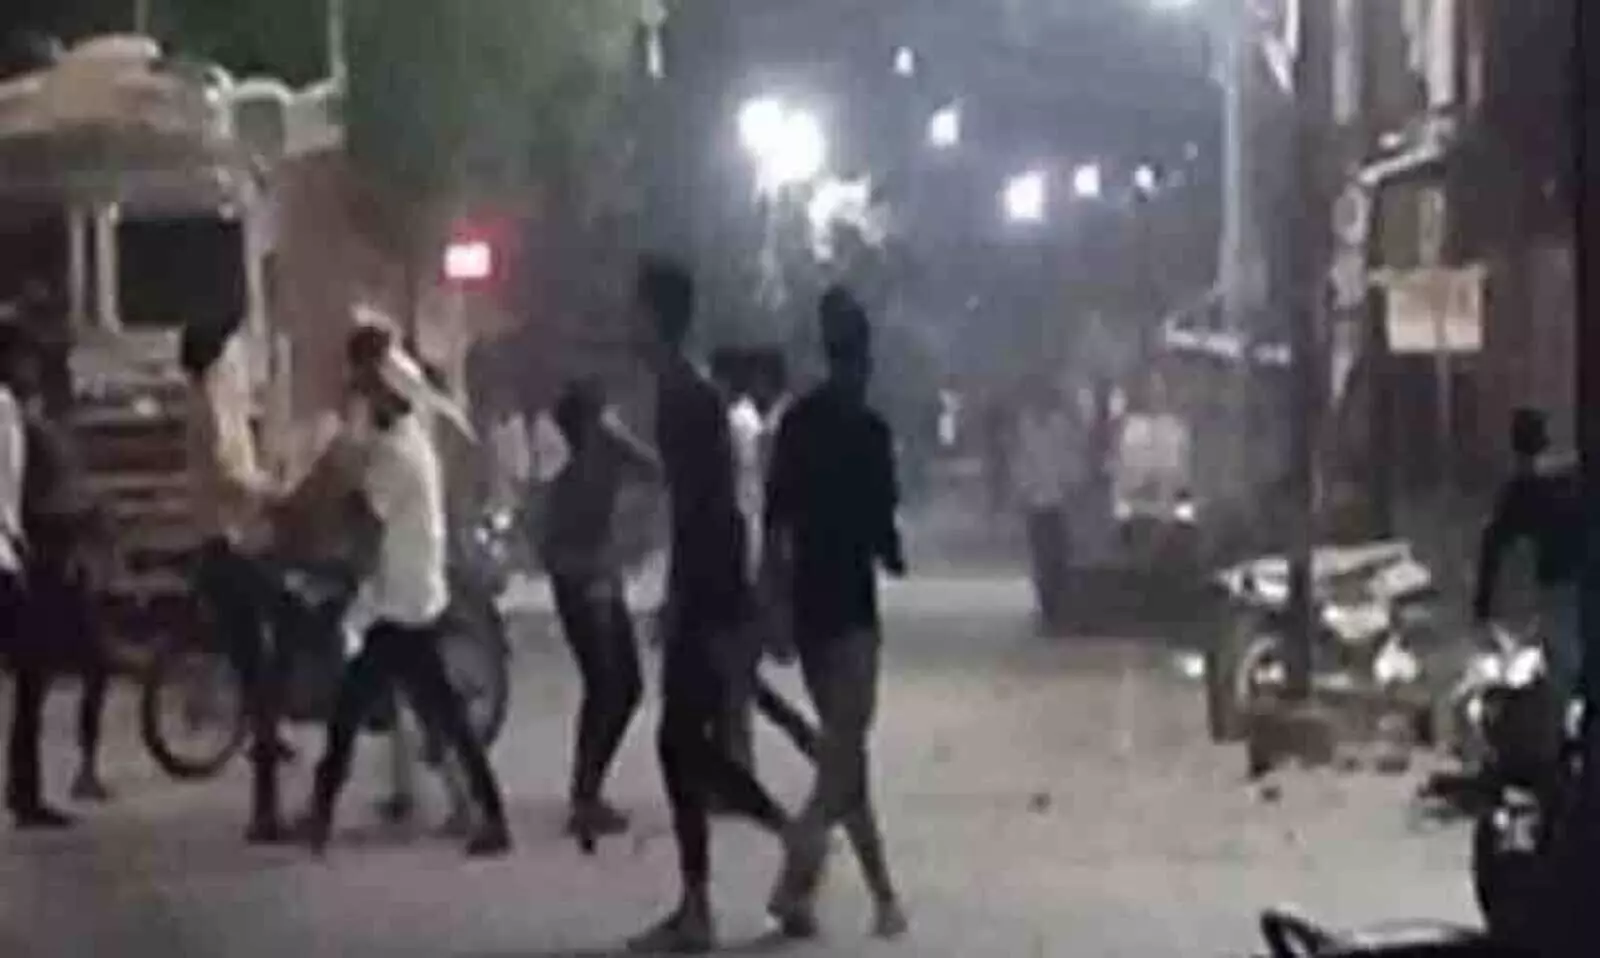 Violence in Maharastra: reports suggest 100-plus arrests so far